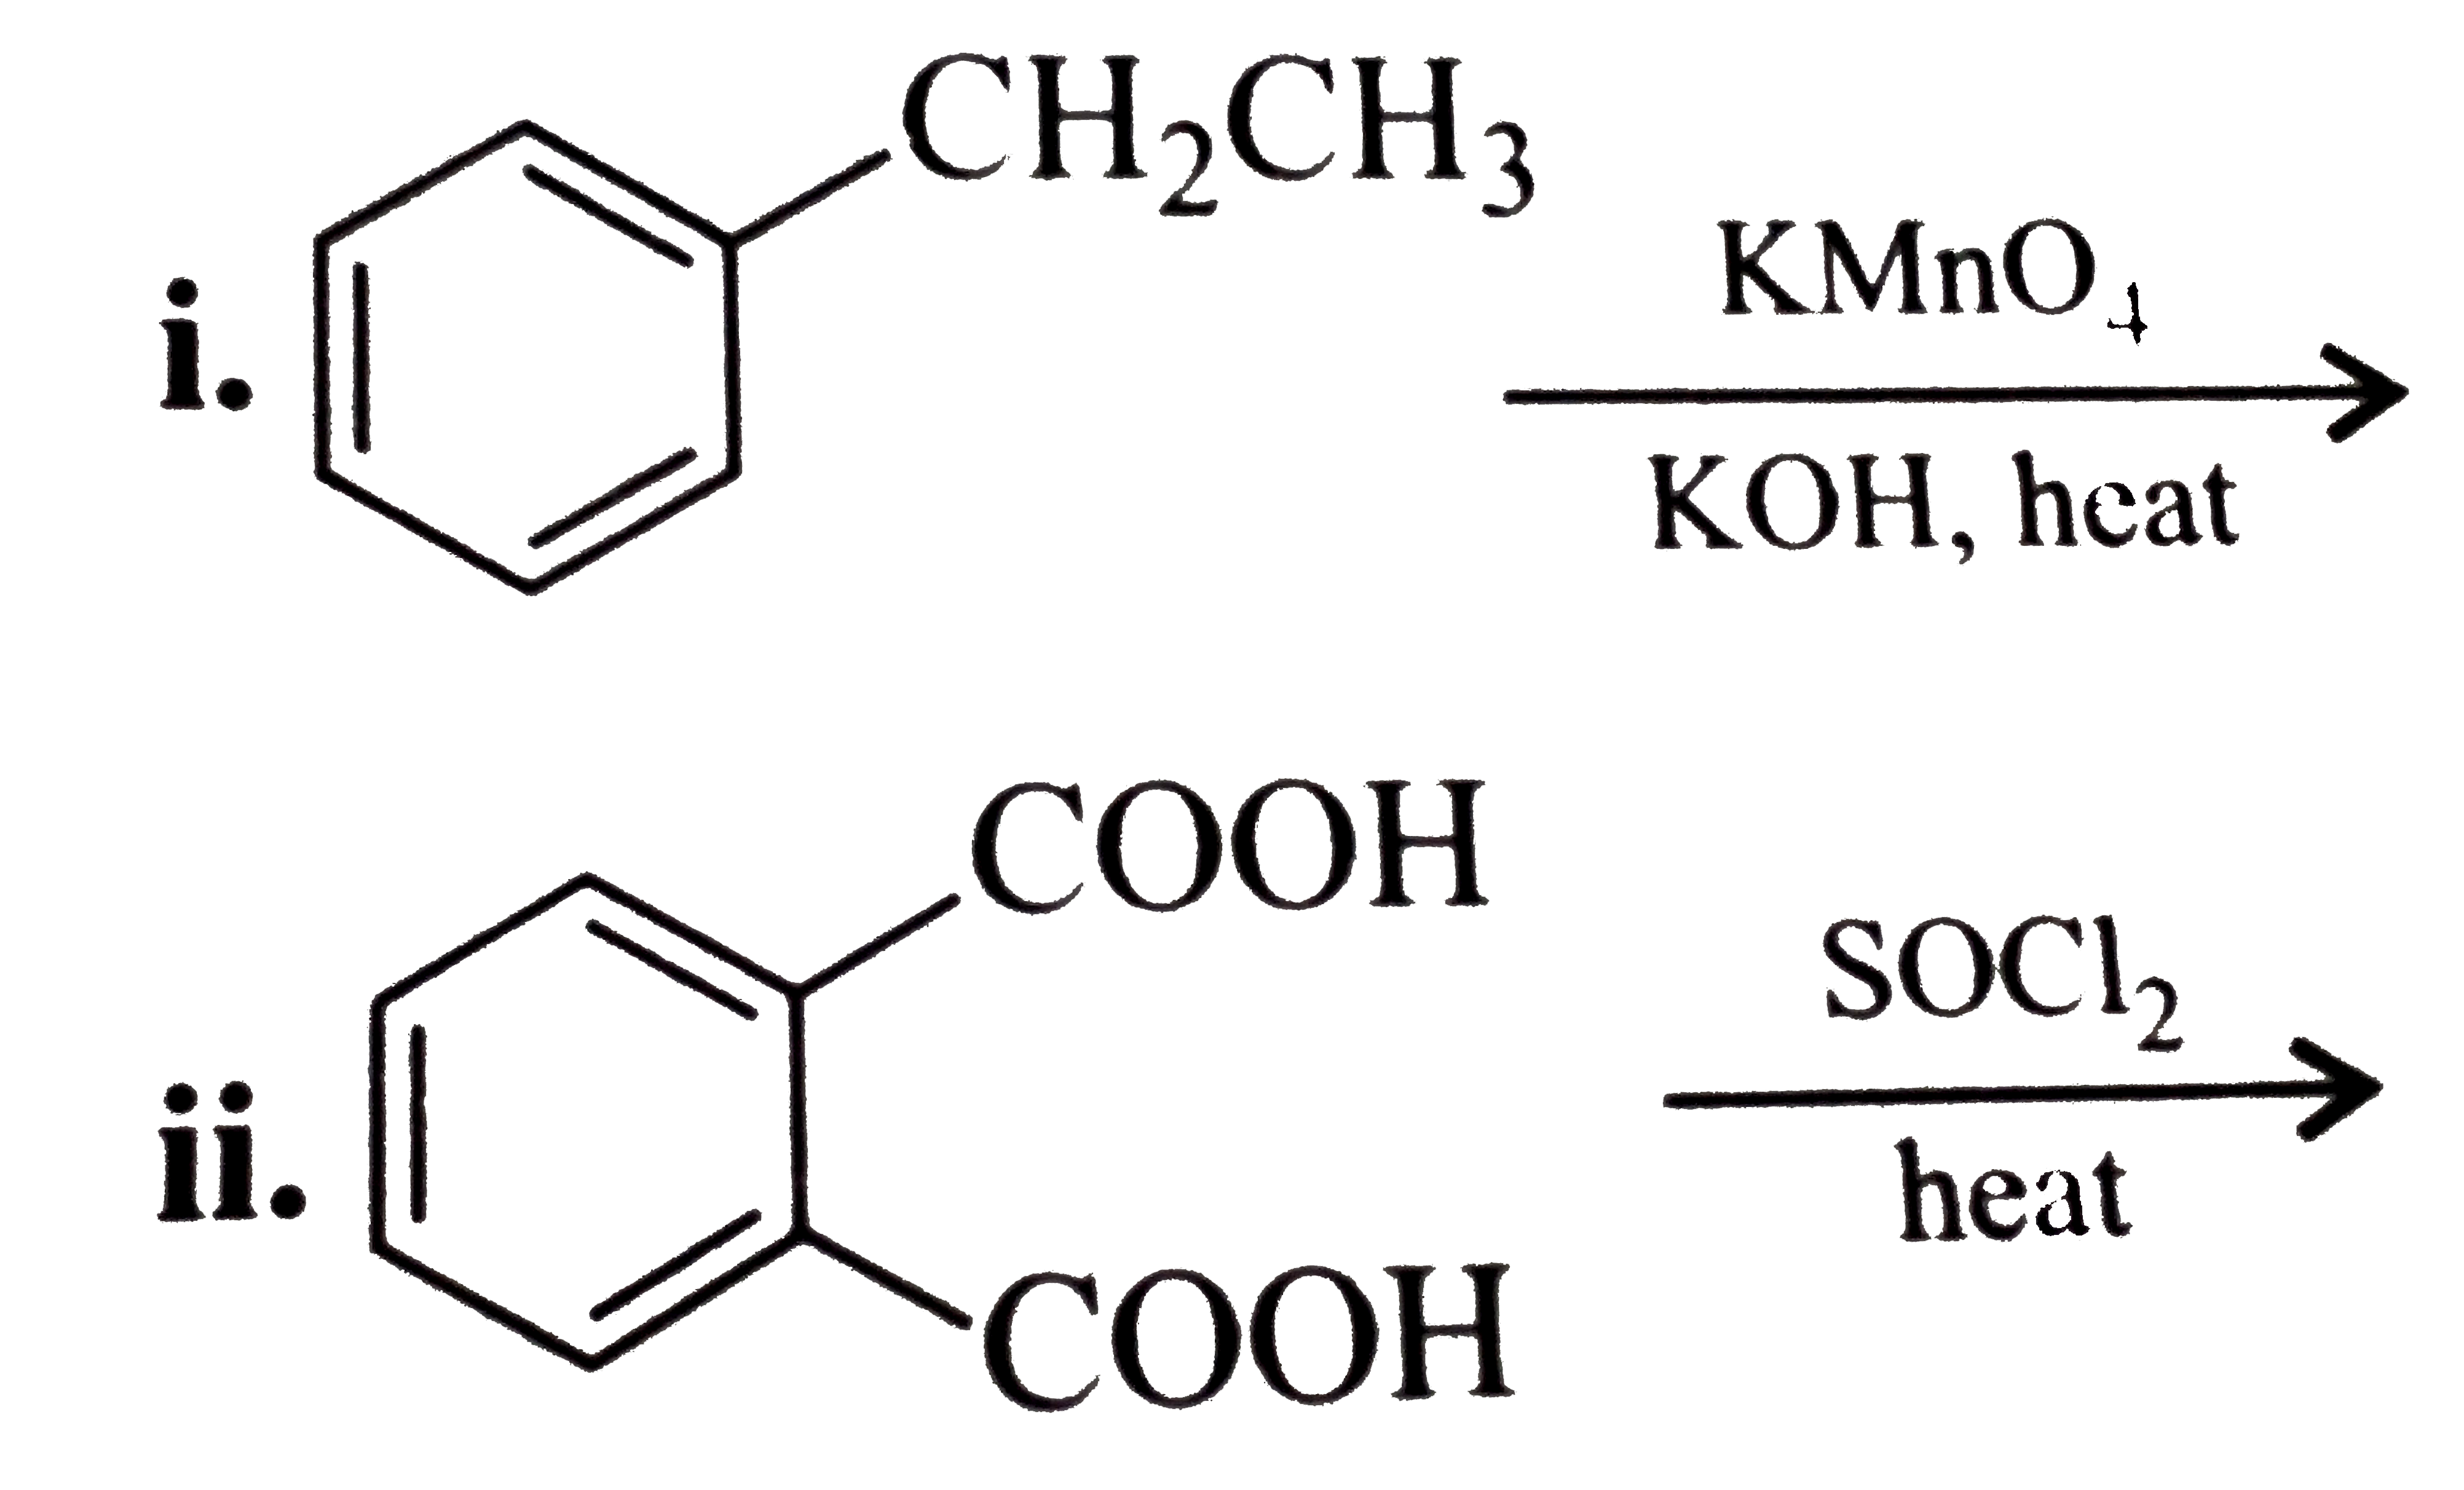 Complete each synthesis by giving the missing starting material, reagent, or products.   i.    ii.    iii. C(6)H(5)CHO overset(H(2)NCONHNH(2))rarr   iv.    v.    vi.    vii. C(6)H(5)CHO+CH(3)CH(2)CHO overset(Dil.NaOH)rarr   viii. CH(3)COCH(2)COOC(2)H(5)overset((i)NaBH(4))underset((ii)H^(+))rarr   ix.    x.    xi.